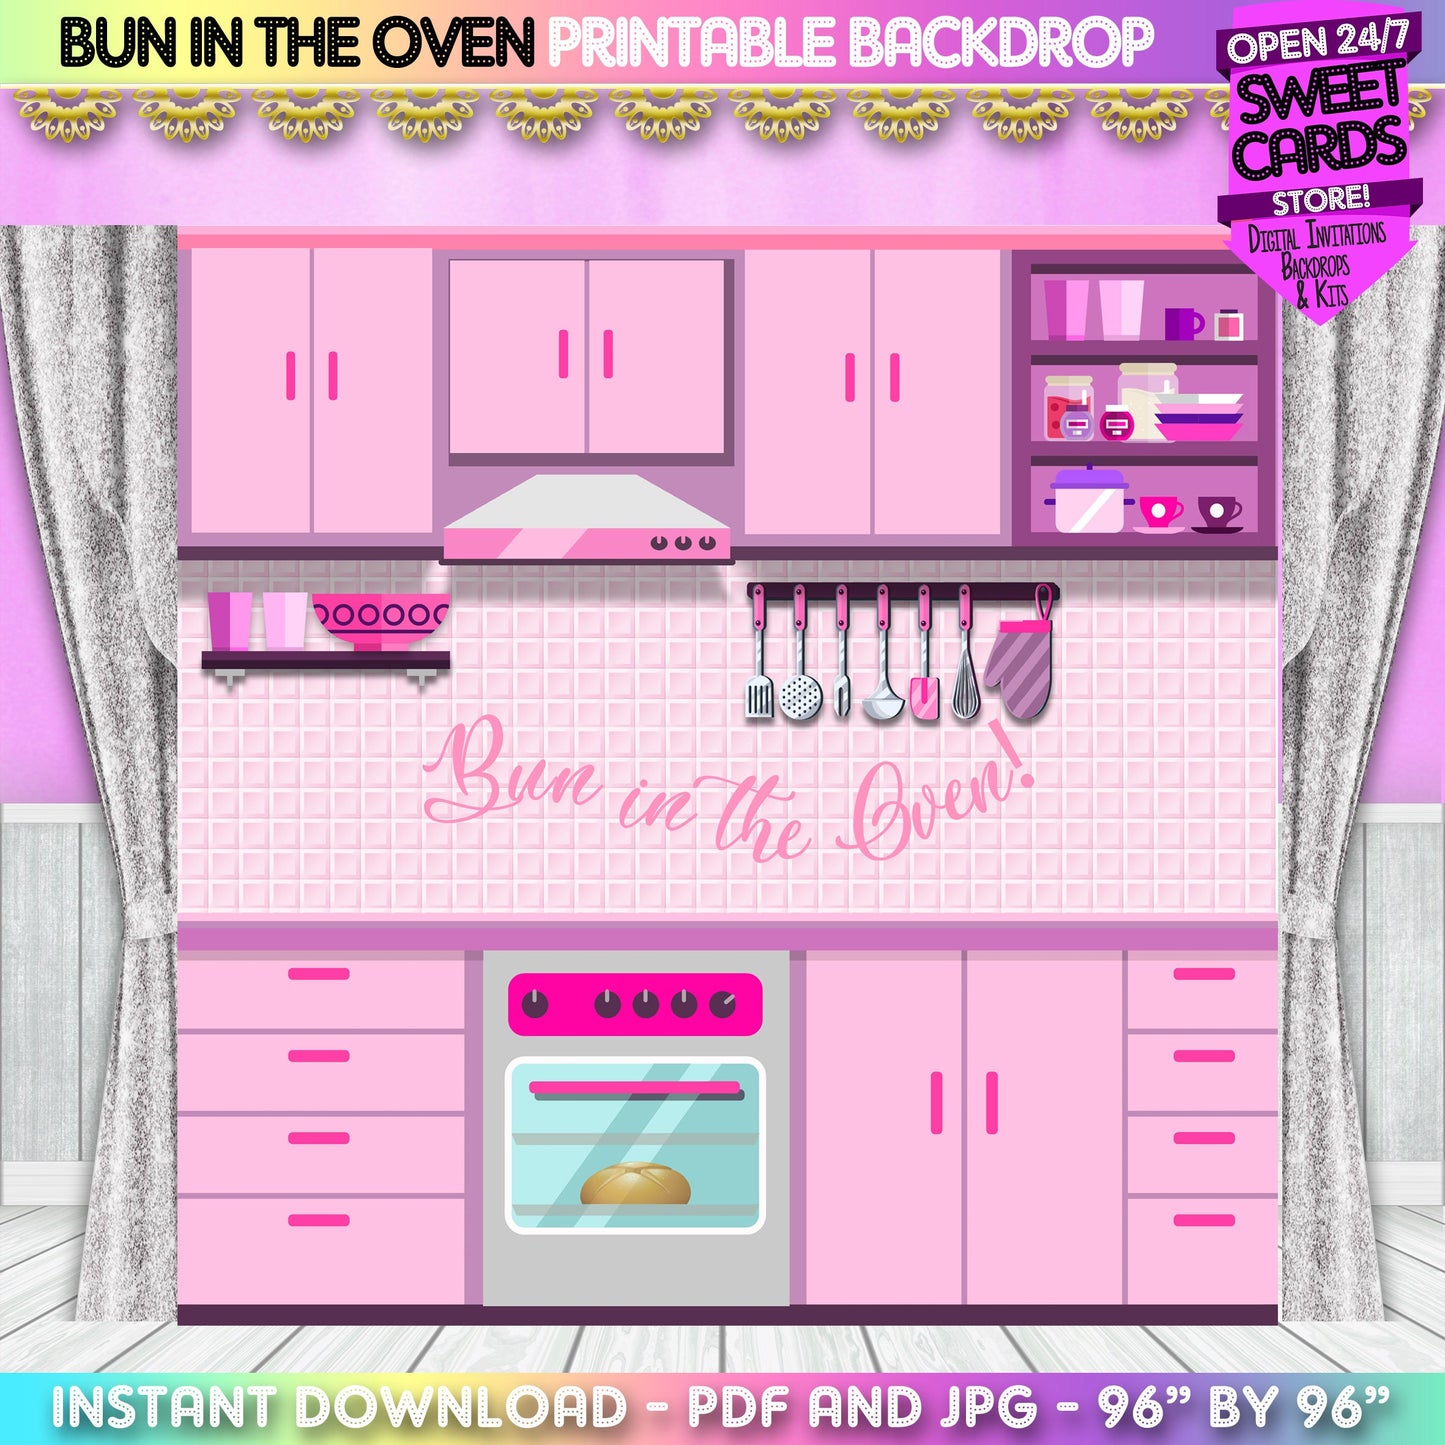 Bun in the oven Kitchen Printable Party Backdrop, Bun in the oven party Printables, Kitchen Party Backdrop, Bun baby shower